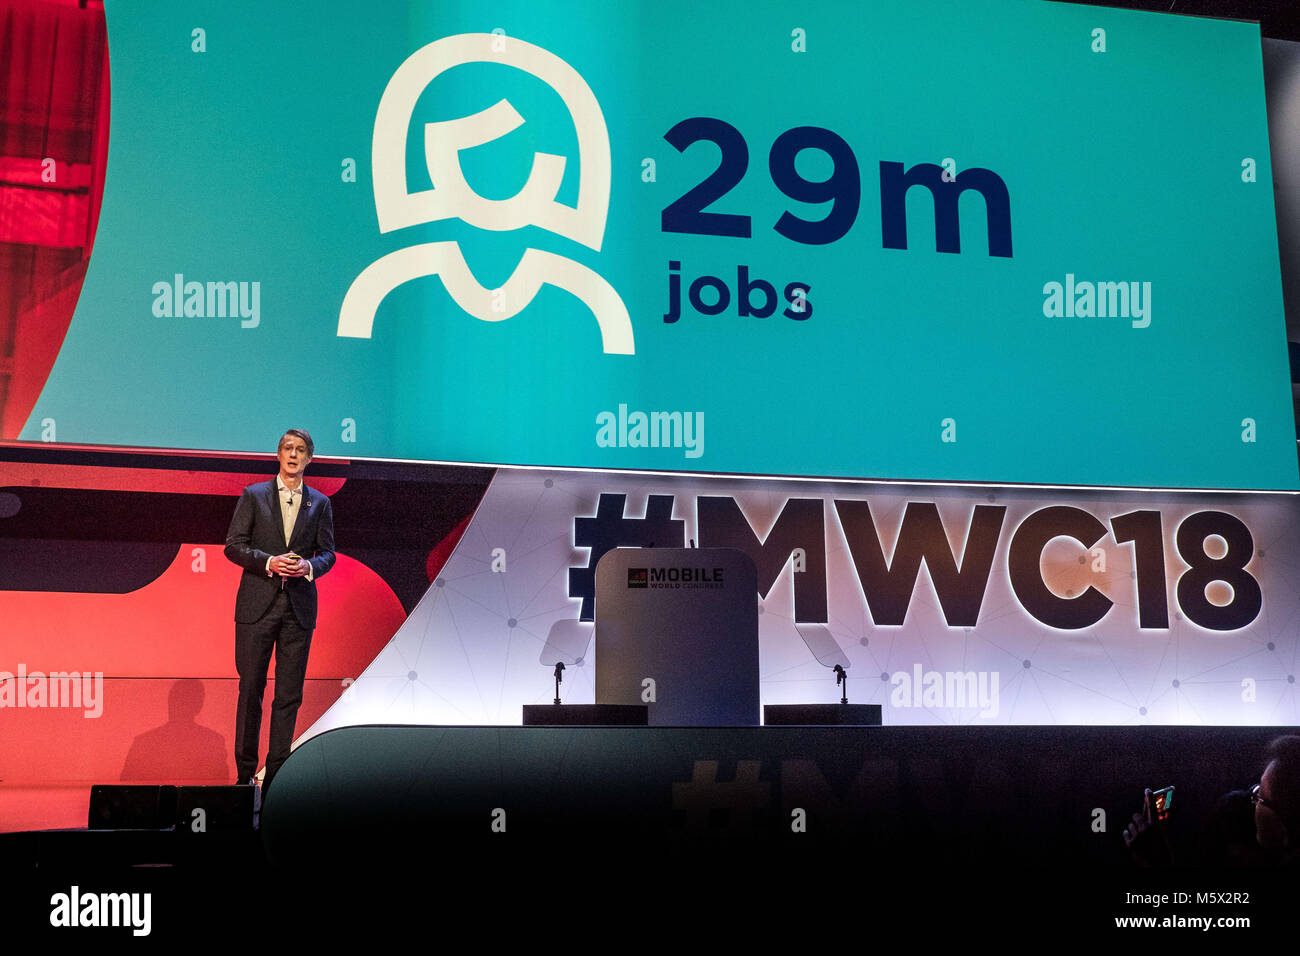 Barcelona, Catalonia, Spain. 26th Feb, 2018. Mats Granryd, Director General of GSMA during his speech at the Key note No. 1 in Barcelona Mobile World Congress. Credit: P Freire 26022018- DSF2039.jpg/SOPA Images/ZUMA Wire/Alamy Live News Stock Photo